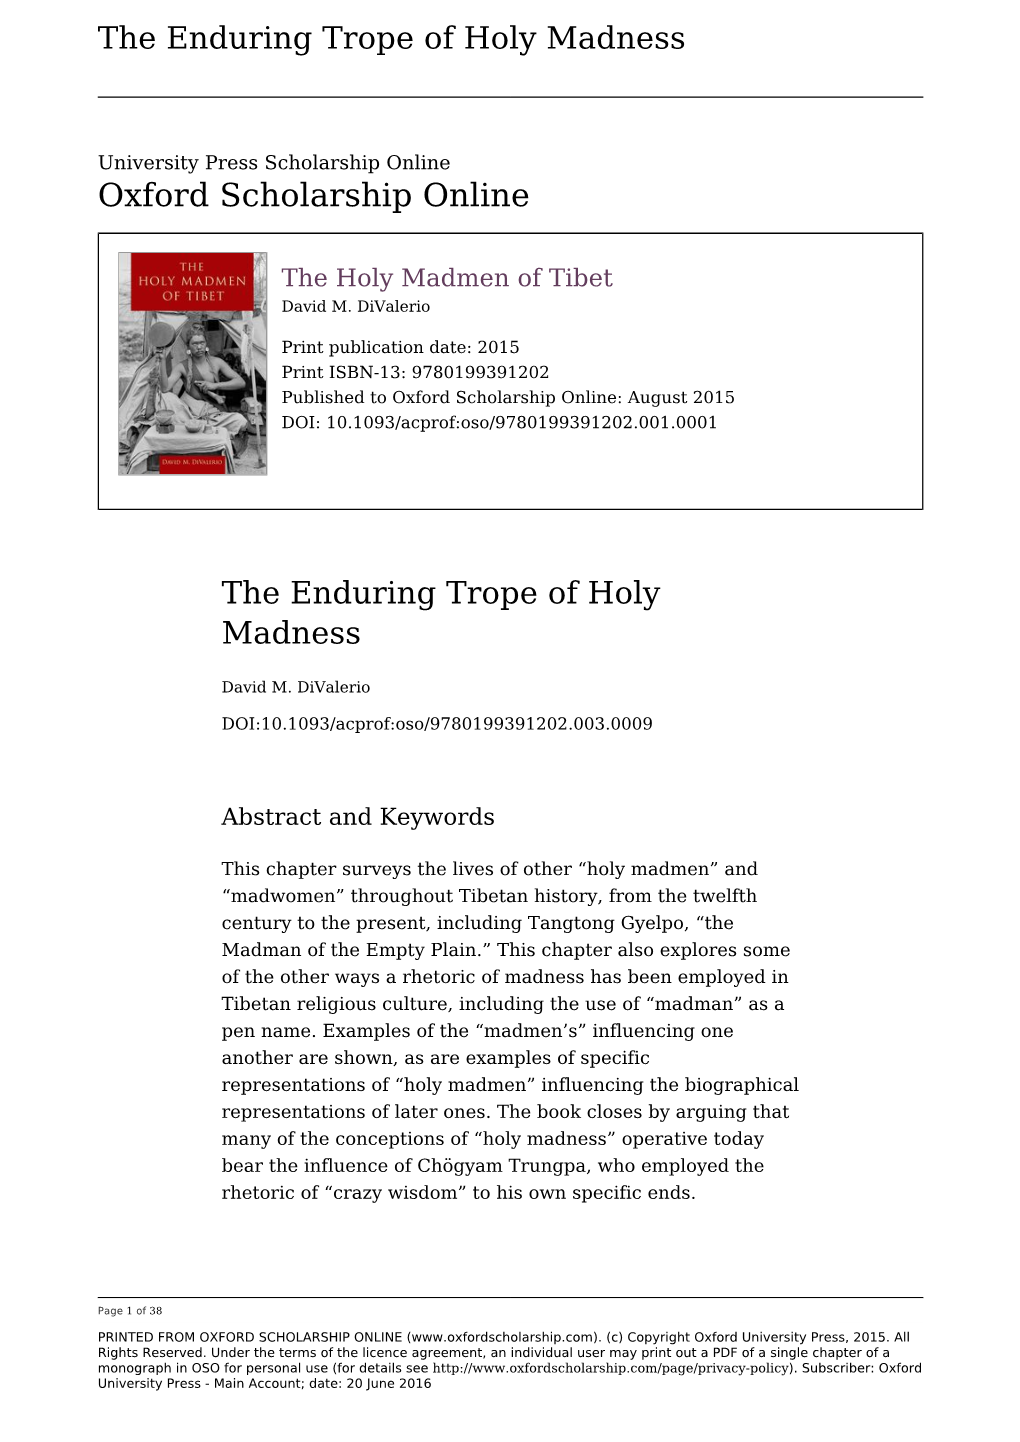 Enduring Trope of Holy Madness